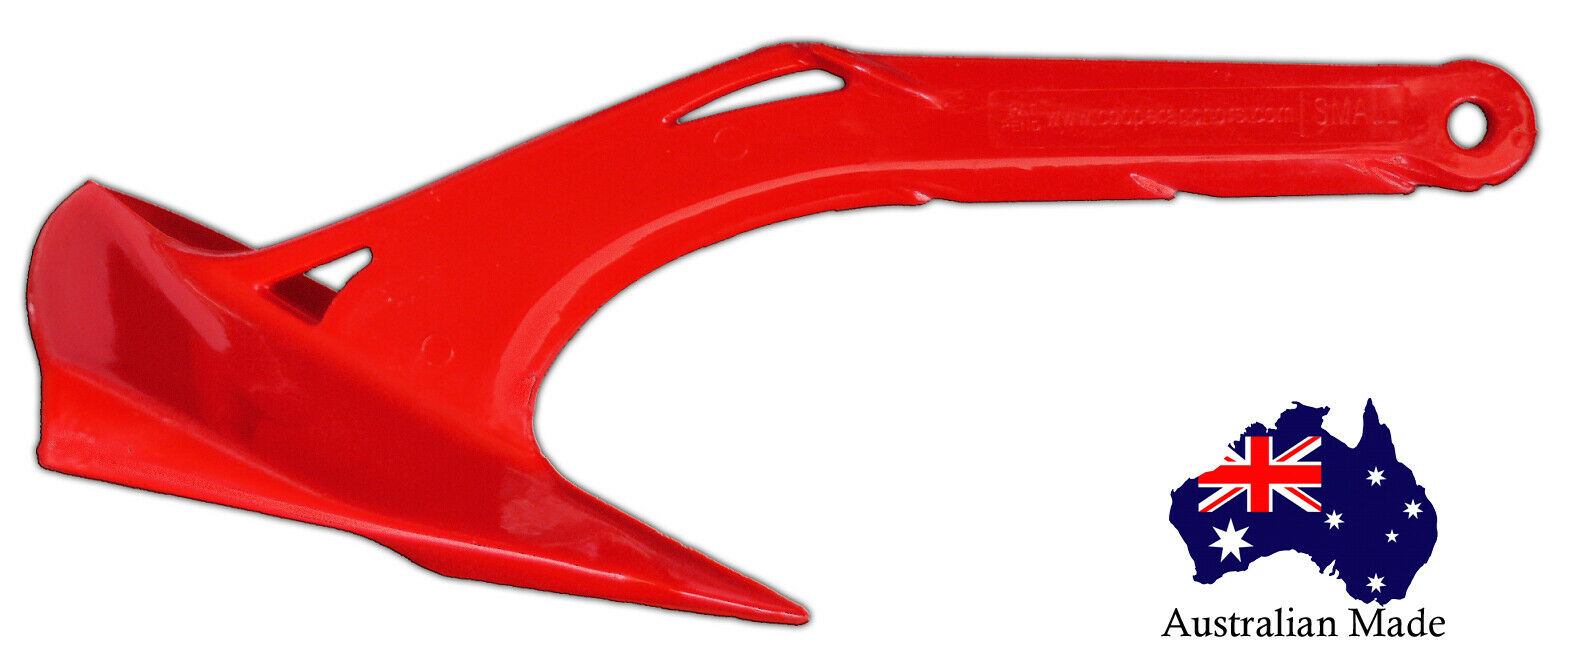 POPULAR PRODUCTS AUSTRALIA = Kayak Anchor Plastic Easy to Use